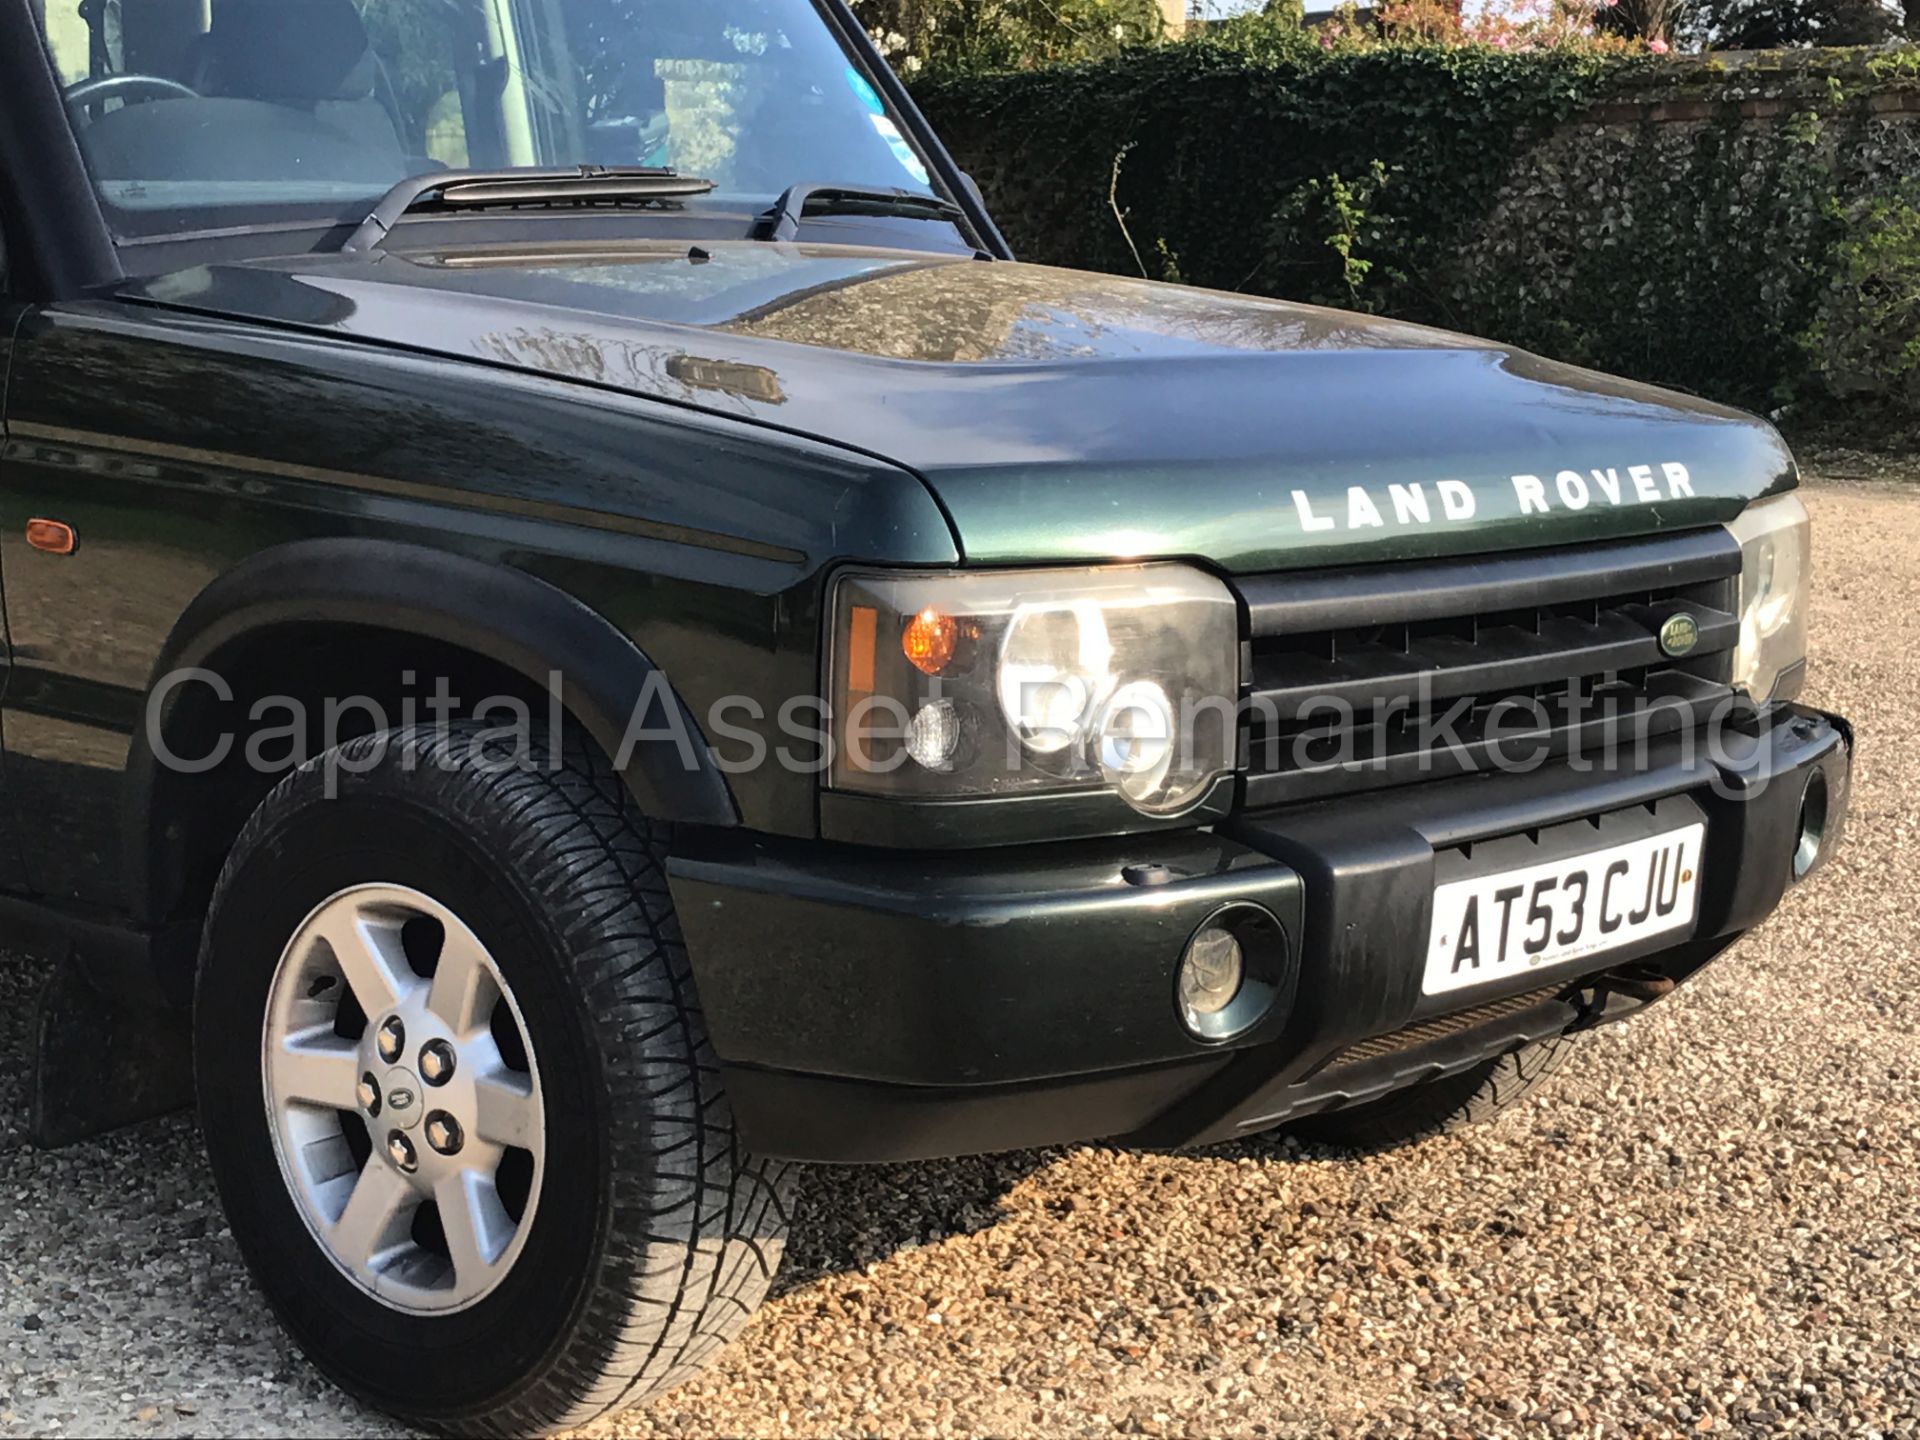 LAND ROVER DISCOVERY TD5 'GS EDITION' (2004 MODEL) 'AUTO - 7 SEATER - AIR CON' (NO VAT - SAVE 20%) - Image 11 of 24